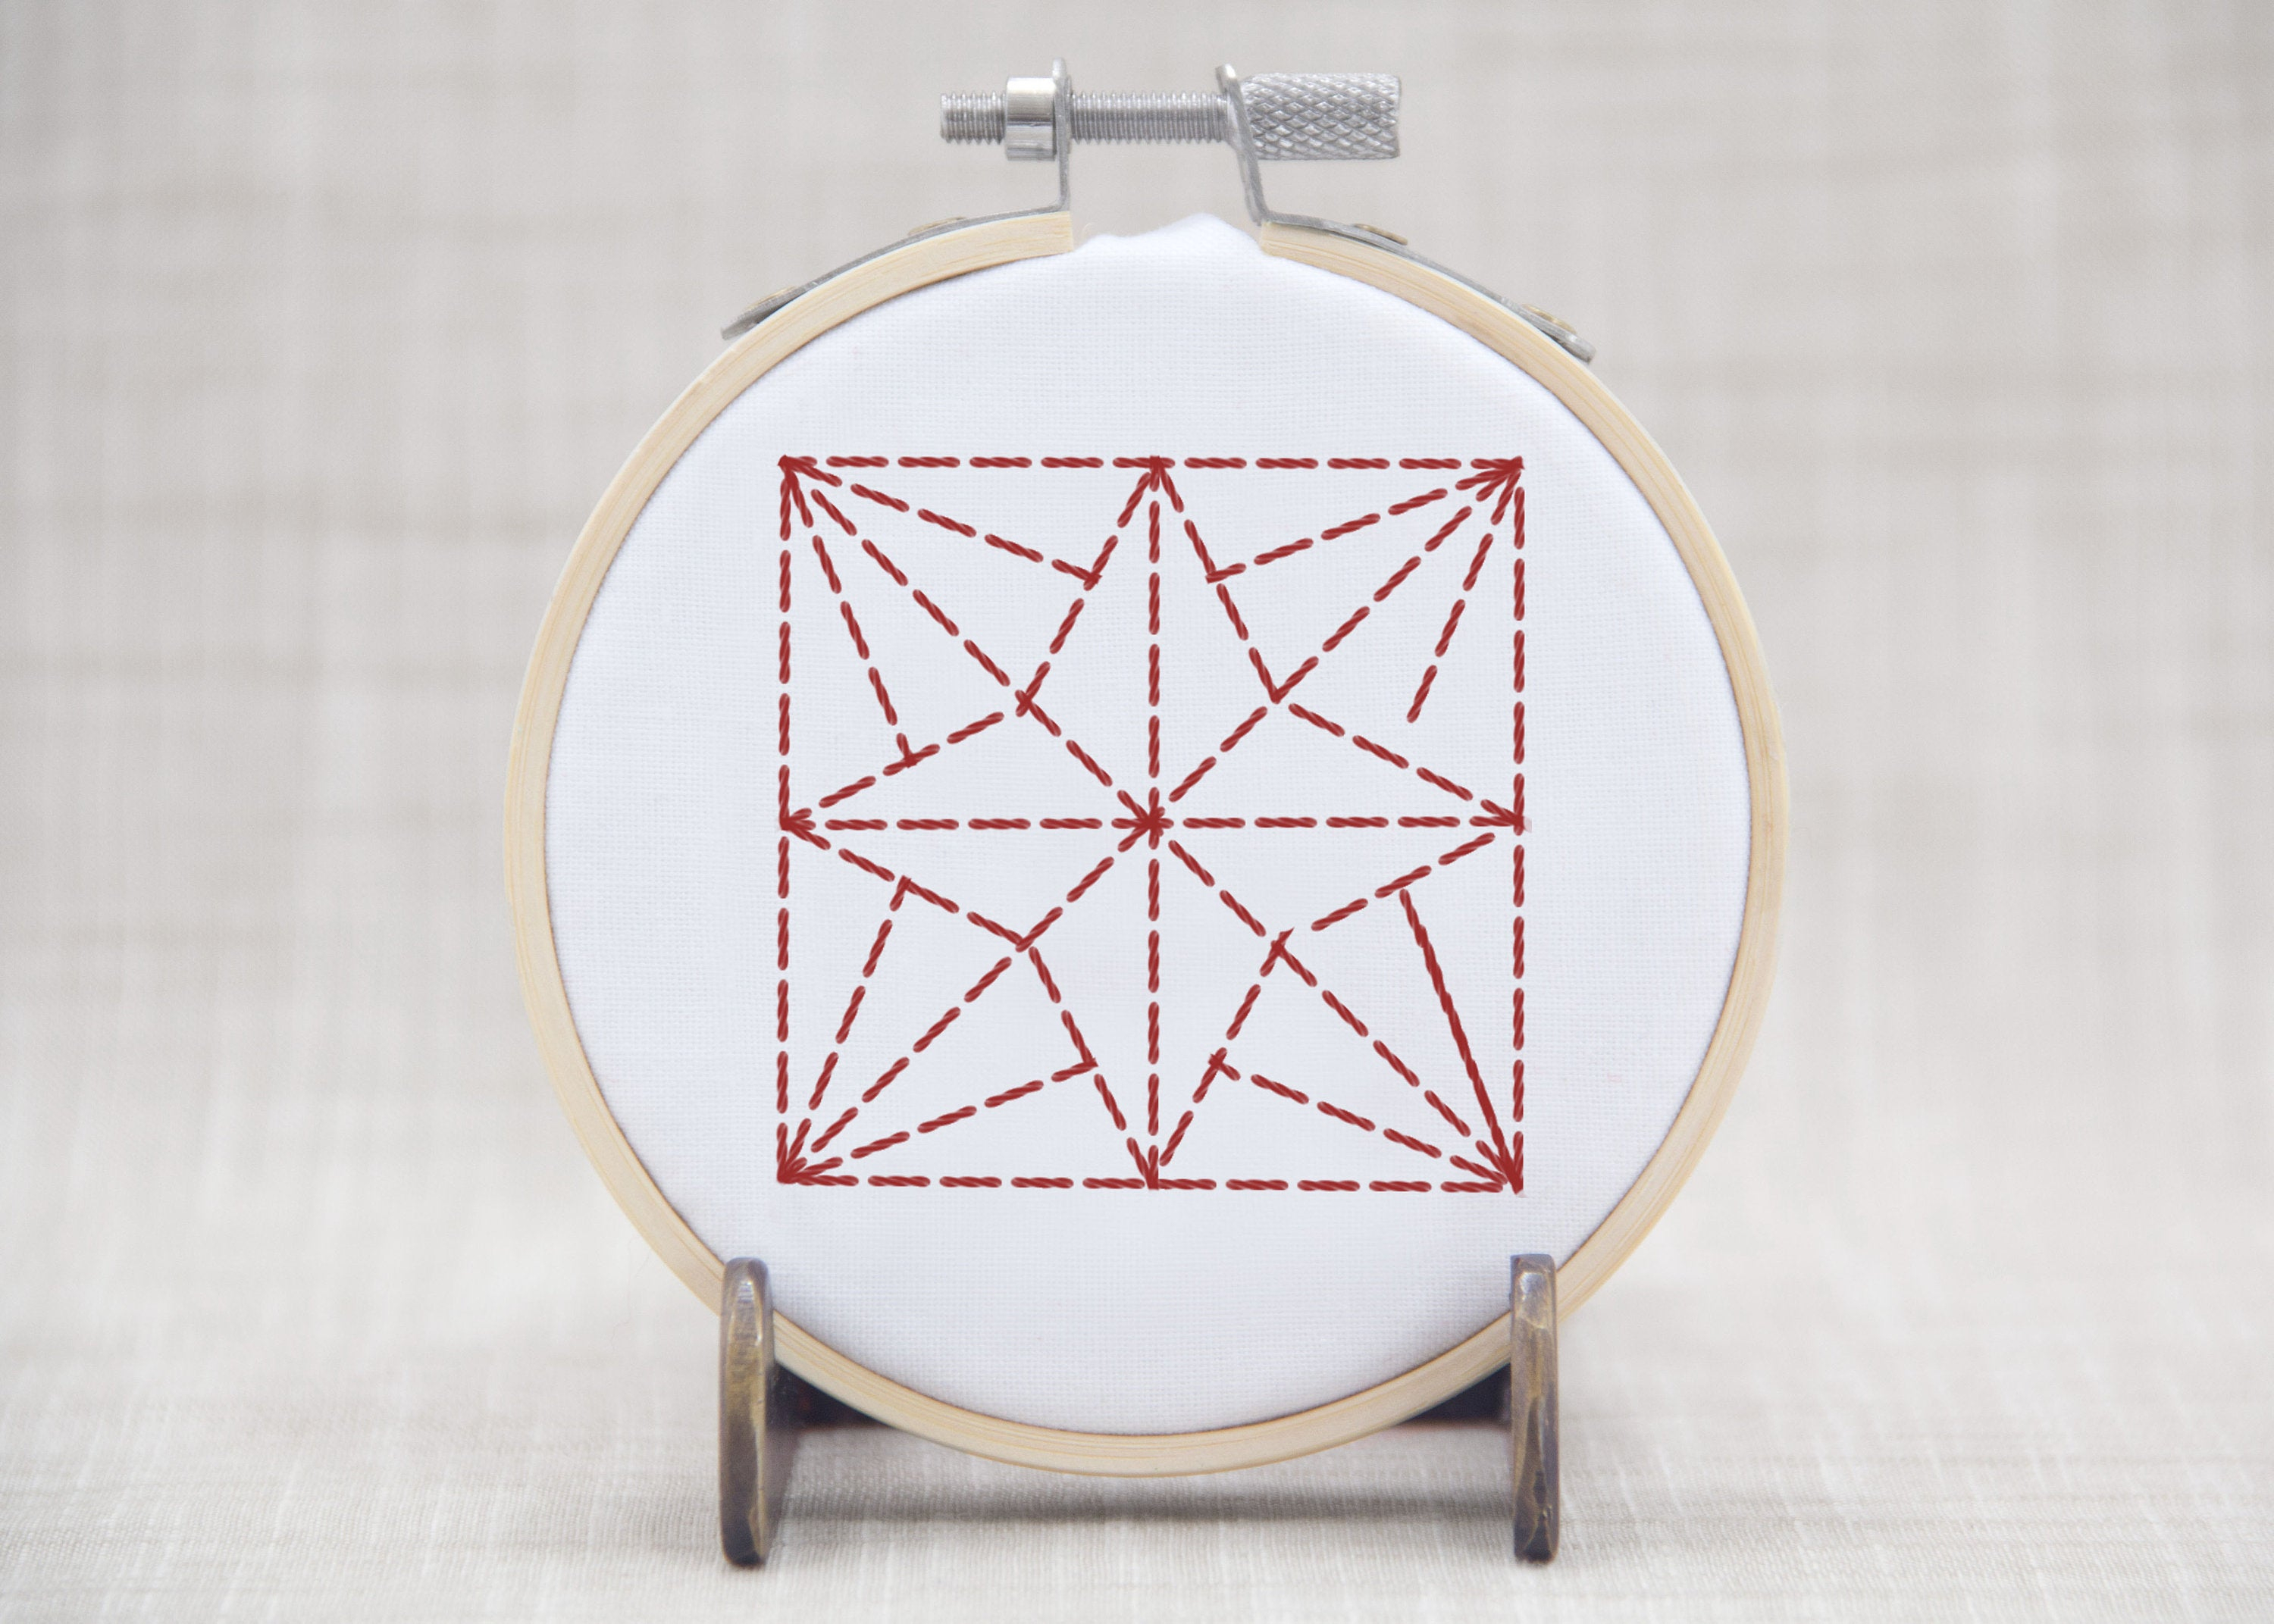 Hand Embroidery Quilt Patterns Hand Embroidery Quilt Block Pattern Embroidery Design Modern Embroidery Beginner Embroidery Hoop Art Quilt Block Star Pattern Christmas